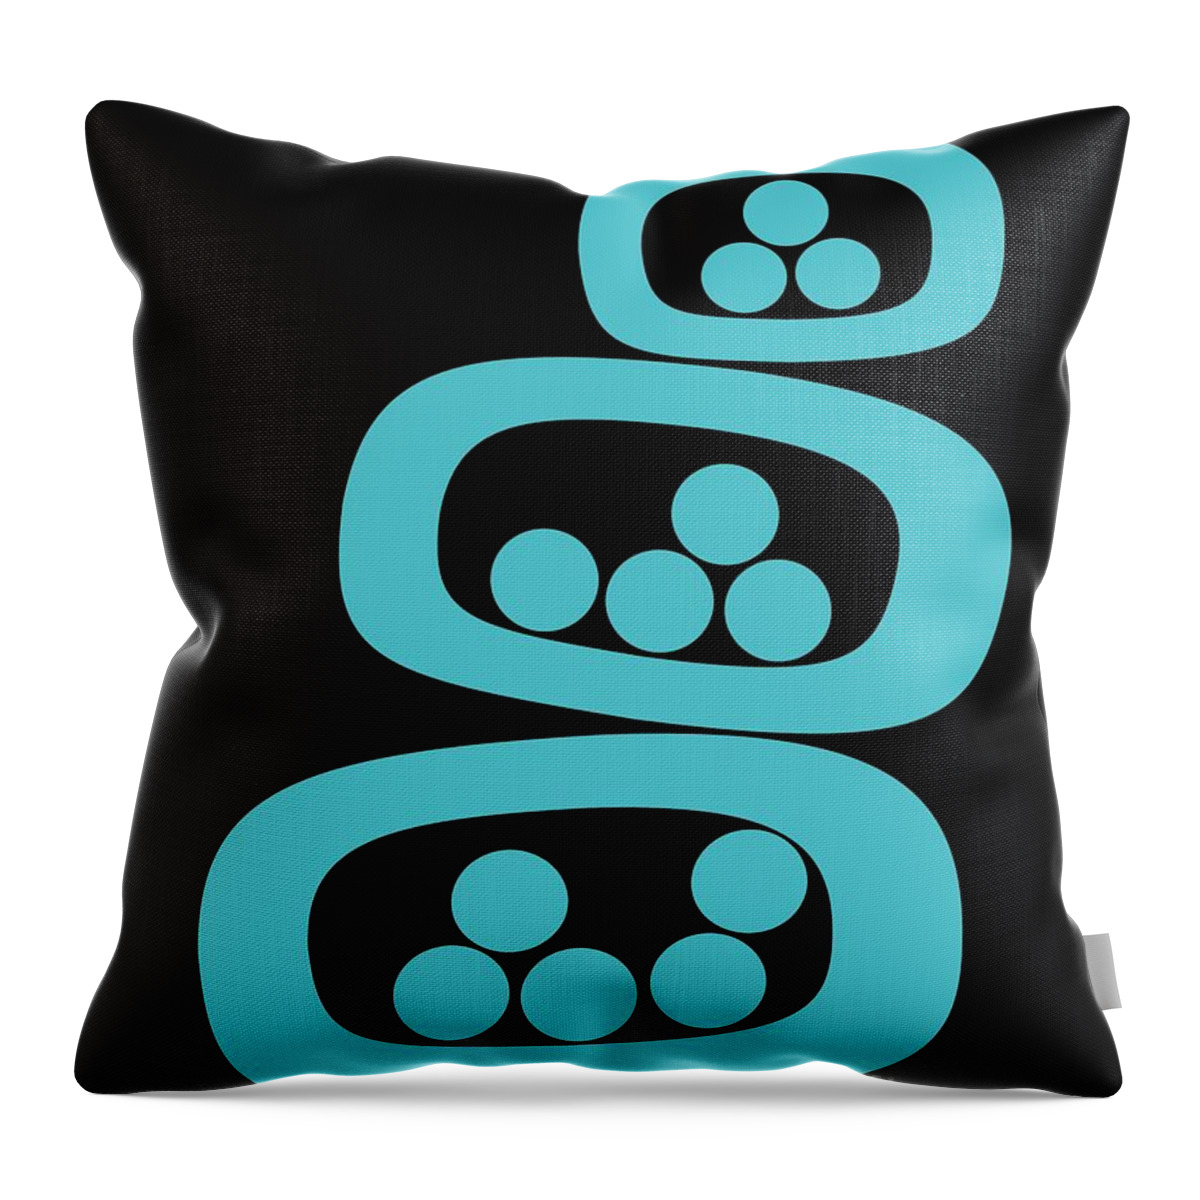 Abstract Throw Pillow featuring the digital art Turquoise Pods by Donna Mibus